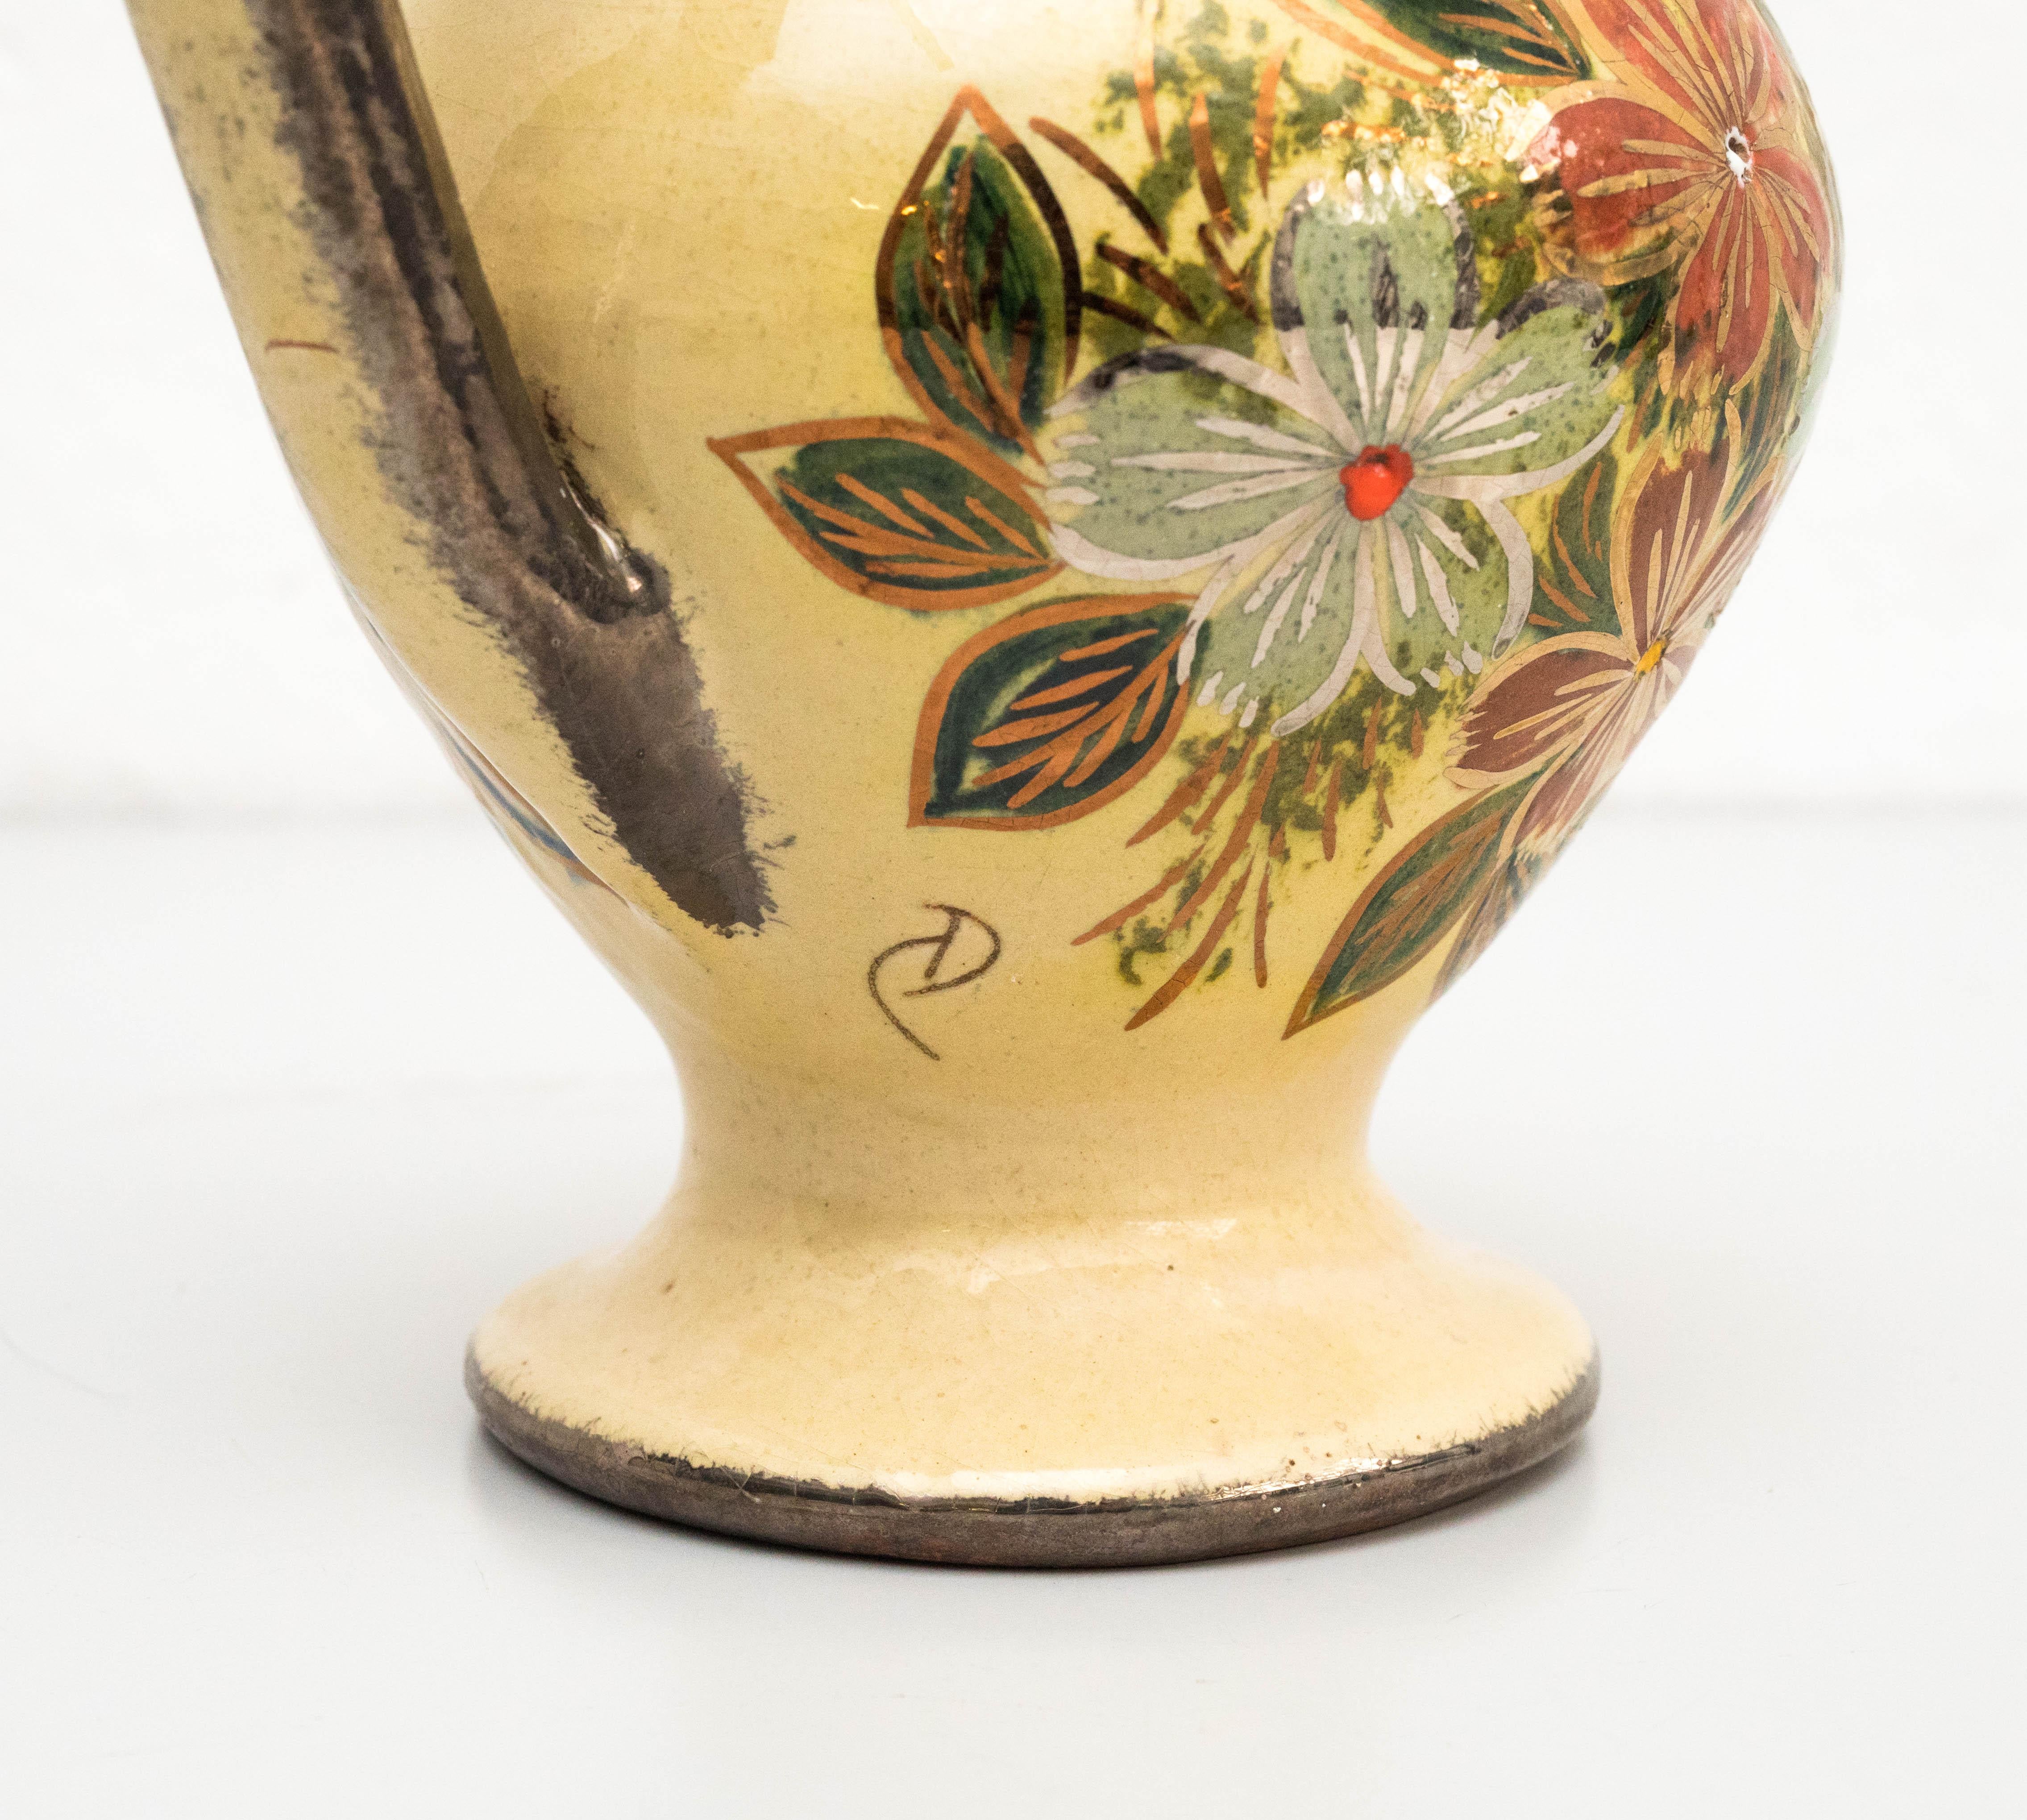 Ceramic Hand Painted Vase by Catalan Artist Diaz Costa, circa 1960 For Sale 1